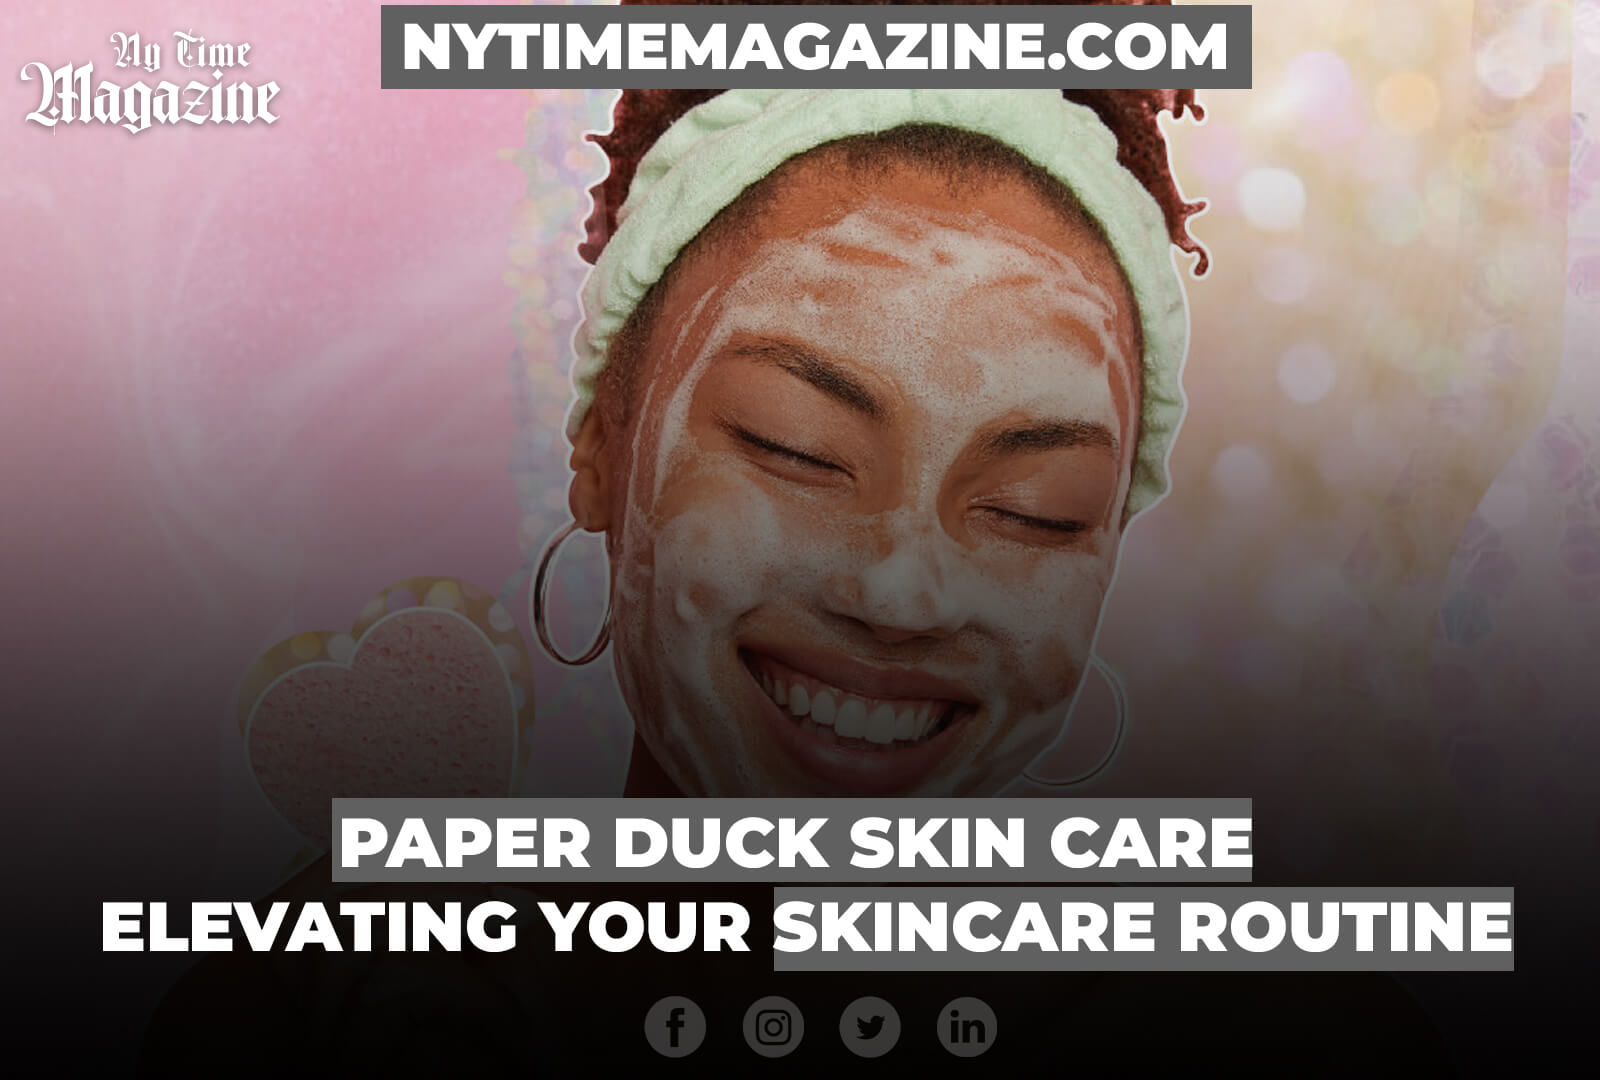 PAPER DUCK SKIN CARE ELEVATING YOUR SKINCARE ROUTINE